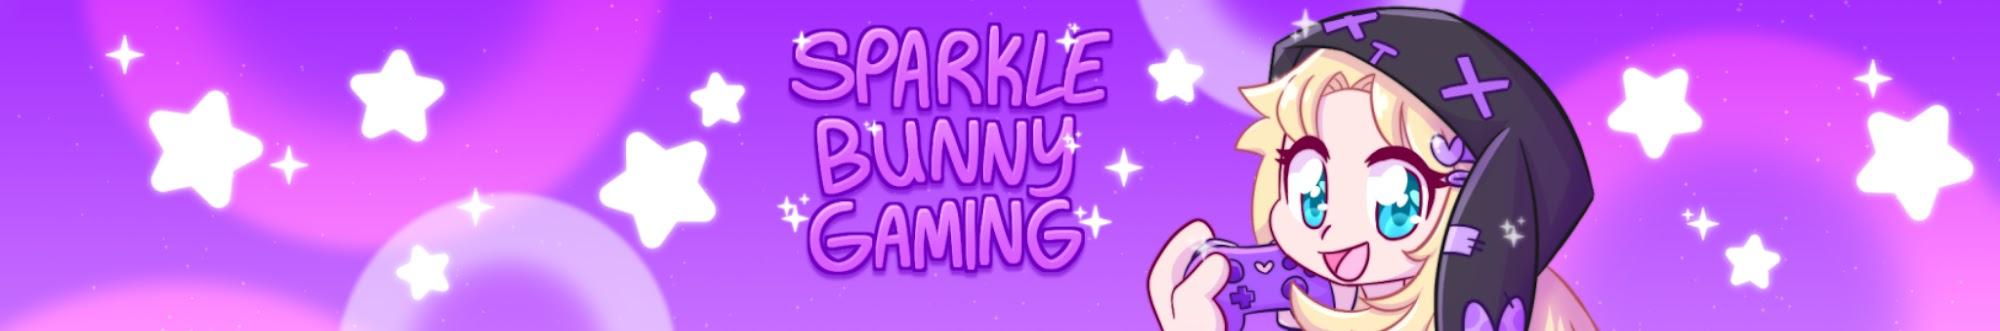 Sparkle Bunny Gaming